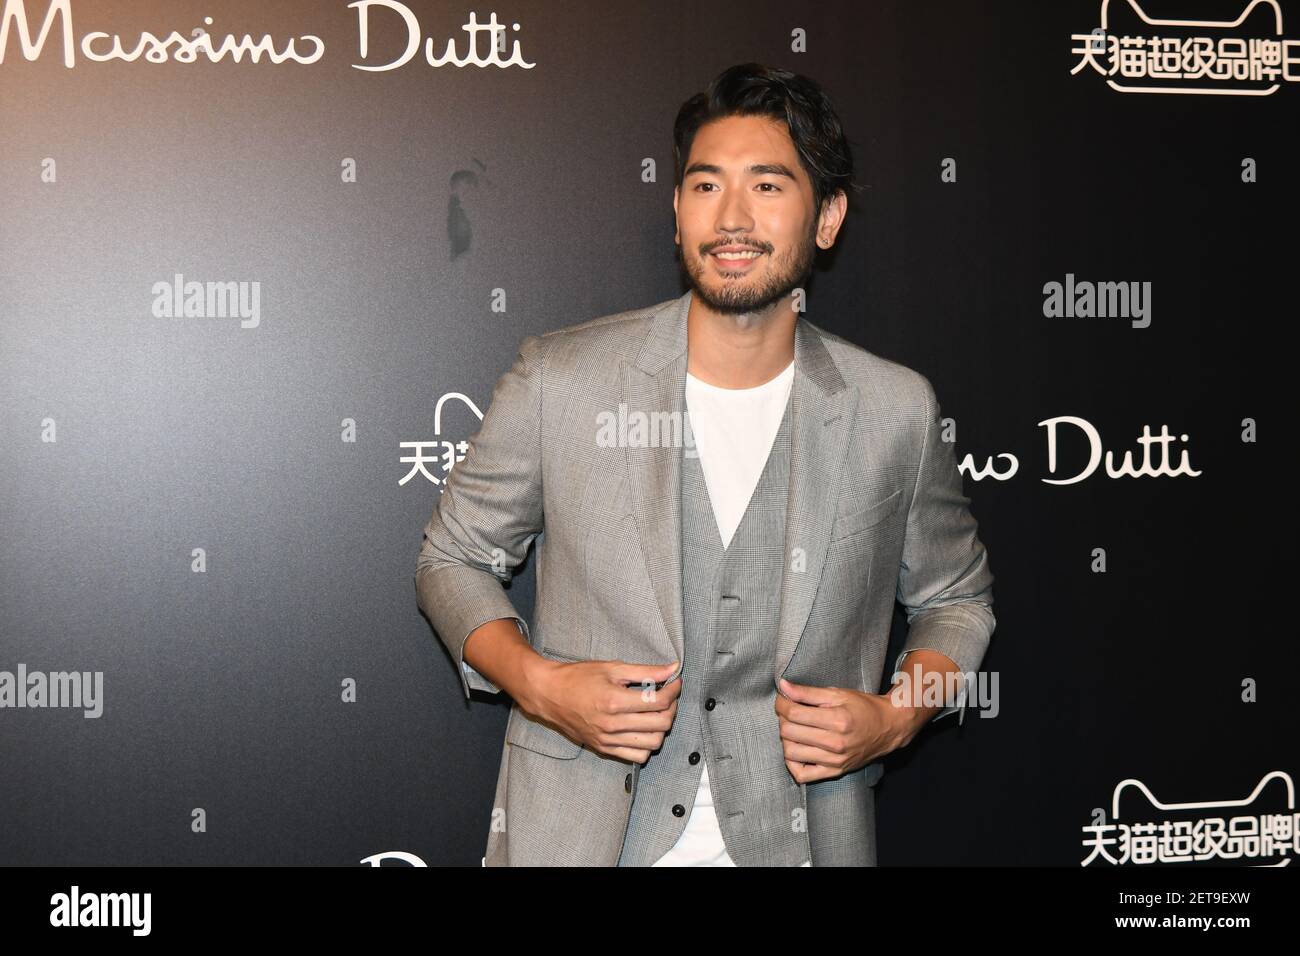 Herziening Madison kust File--Godfrey Gao attends Massimo Dutti 2018 Autumn/Winter series in  Shanghai, 18 July 2018. Godfrey Gao, Taiwanese-Canadian model and actor,  and first Asian model to be signed on by luxury brand Louis Vuitton,